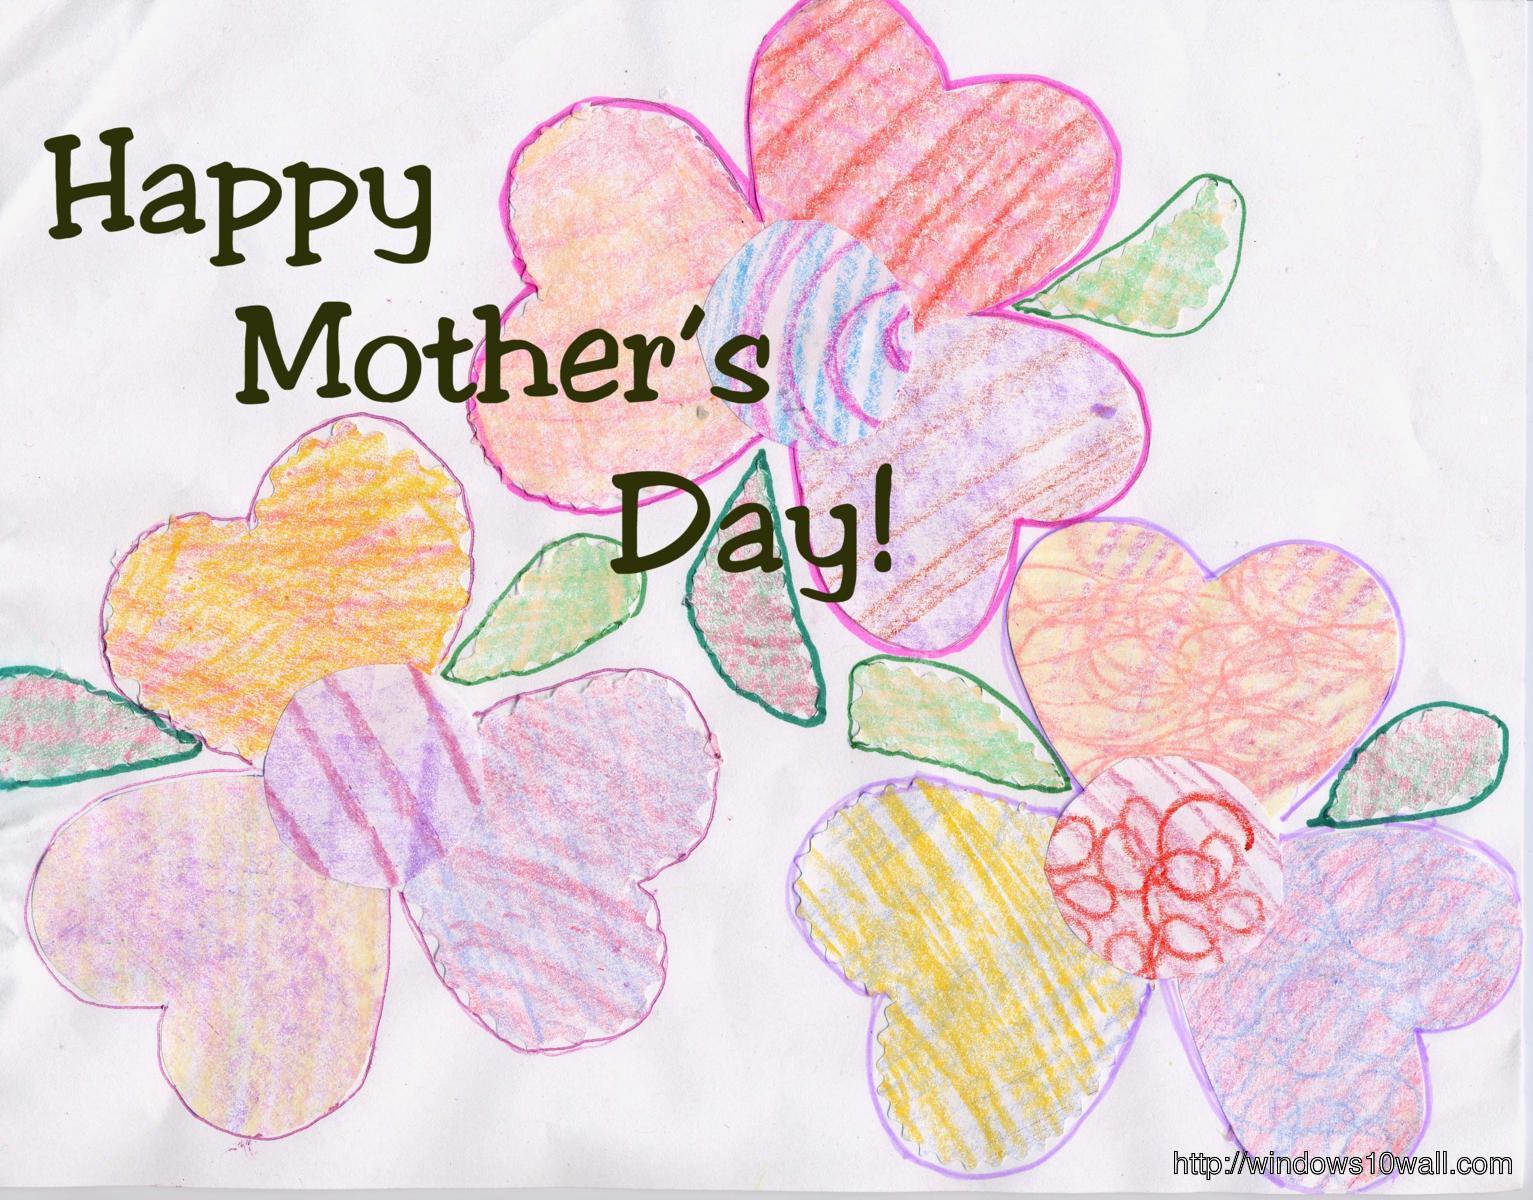 Mothers Day Hd 2014 Wallpaper.